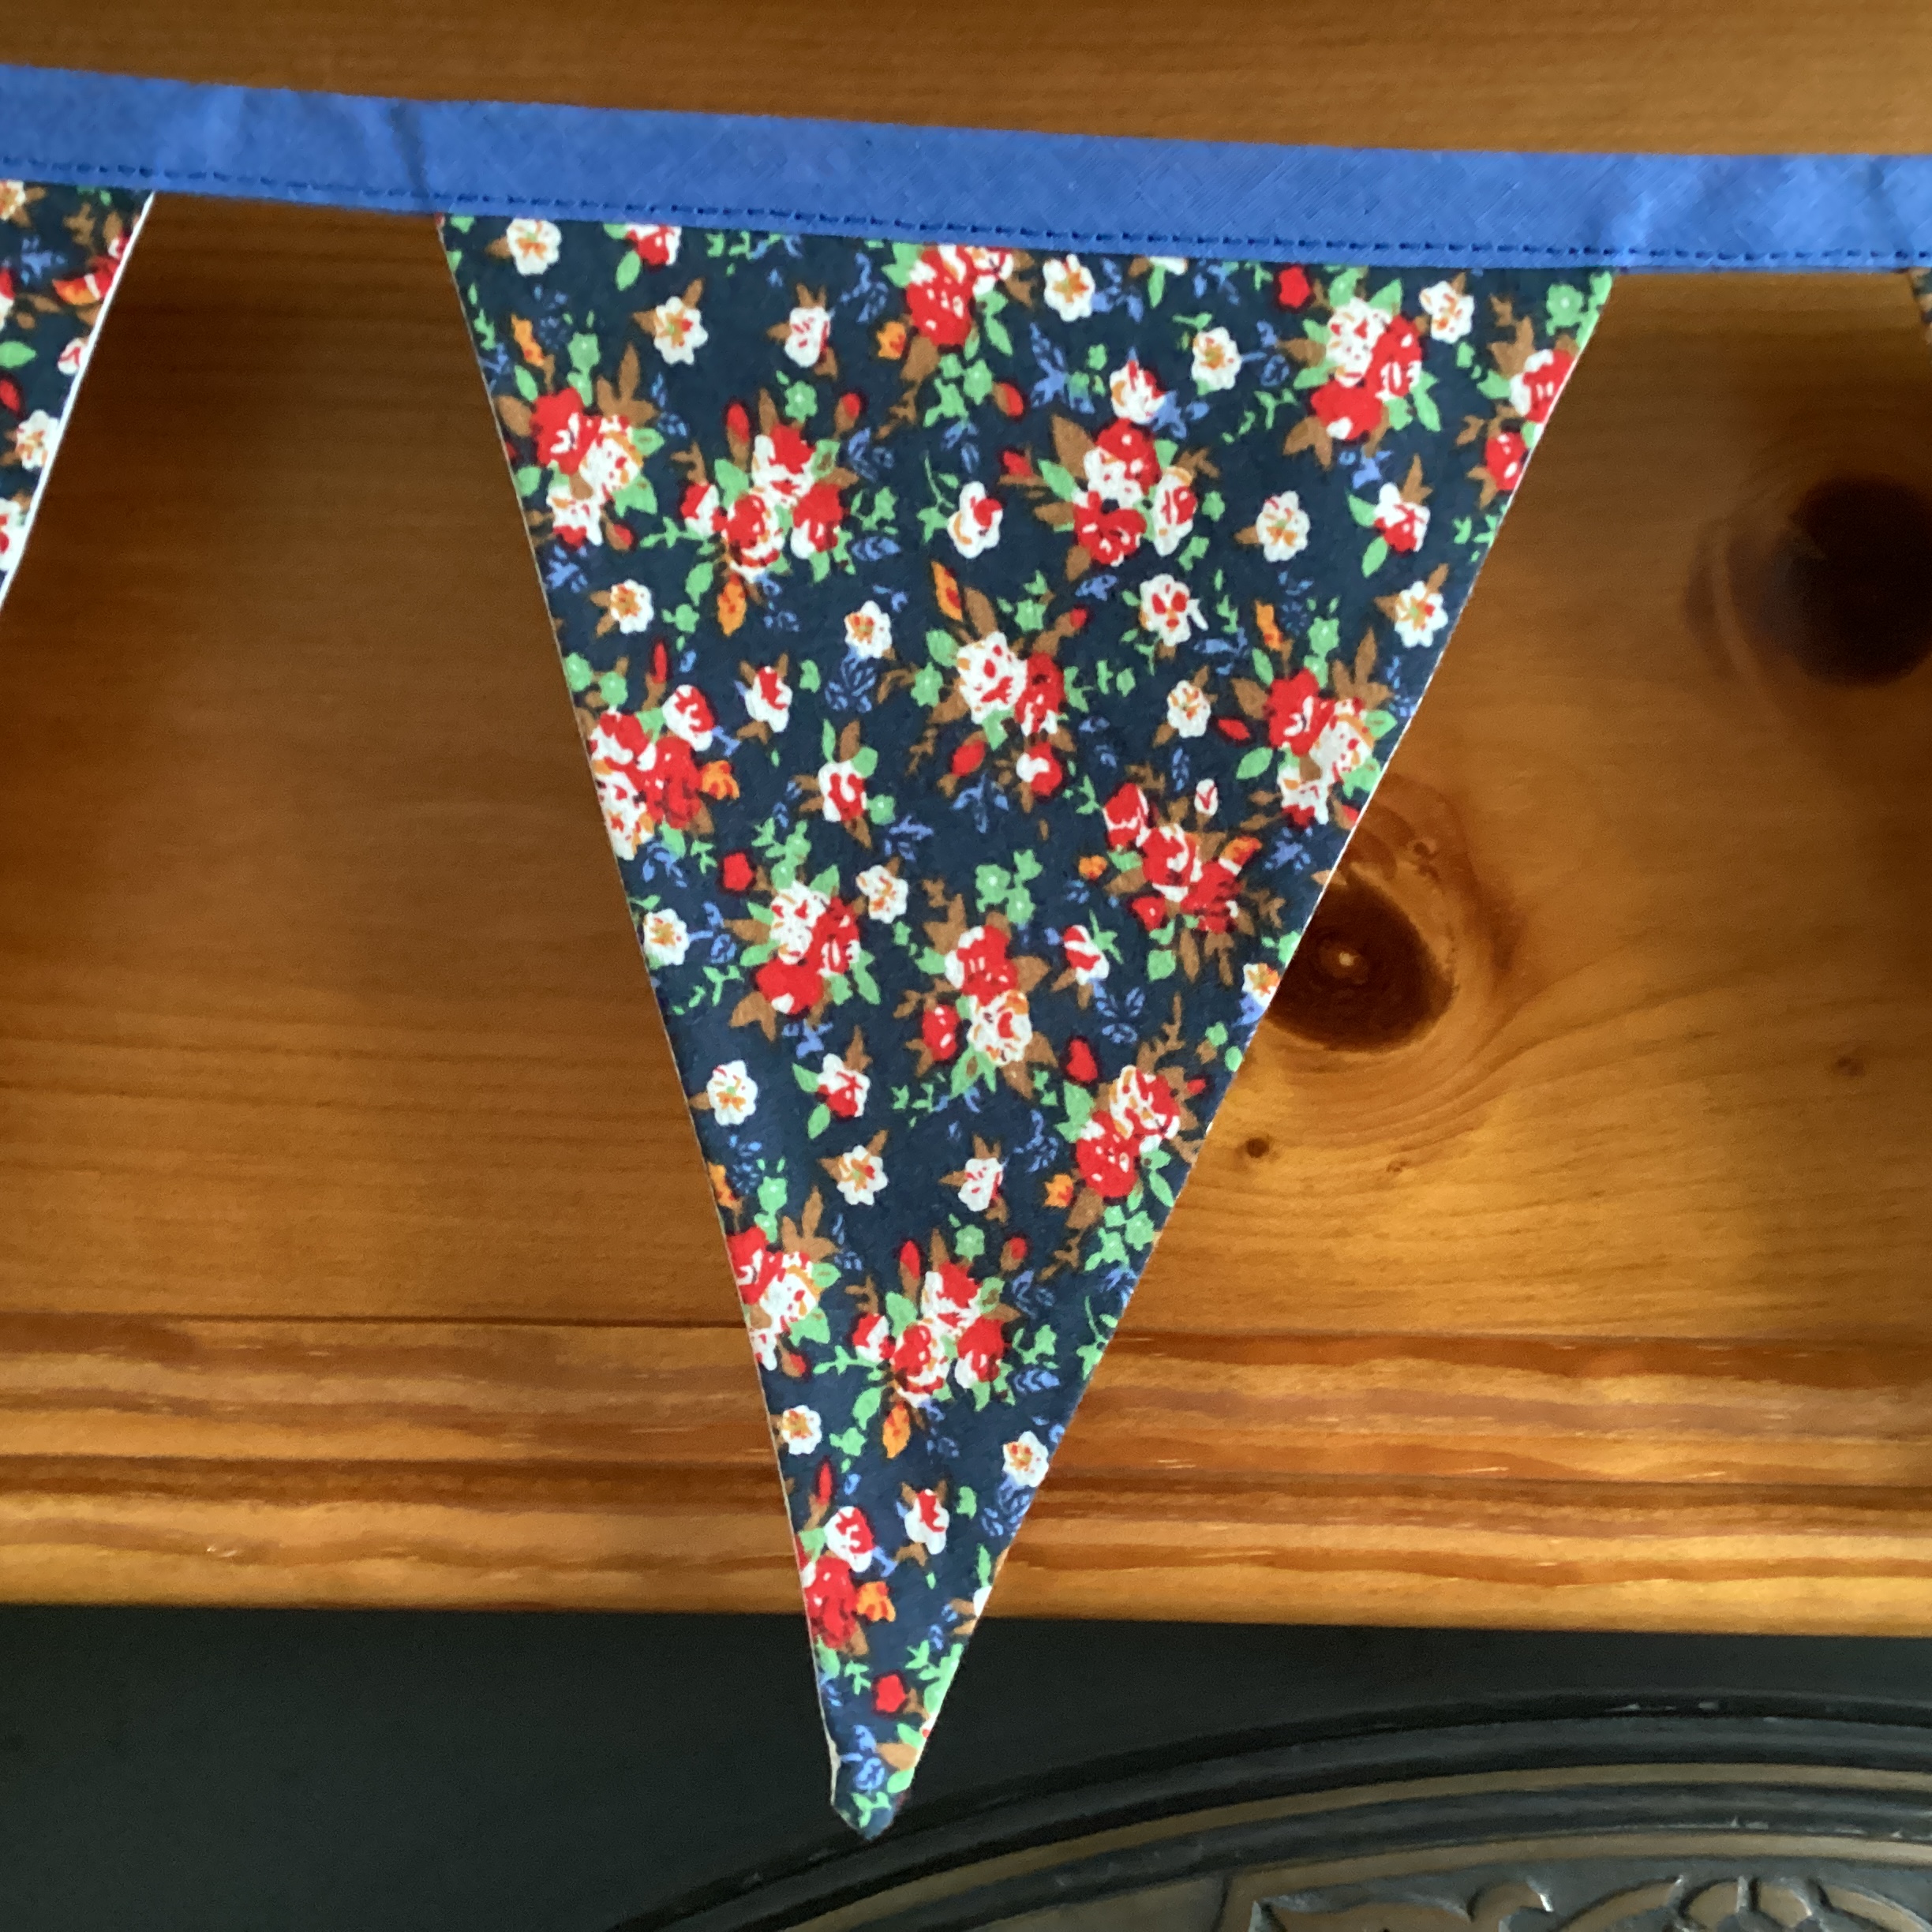 Bunting - ditsy red flowers